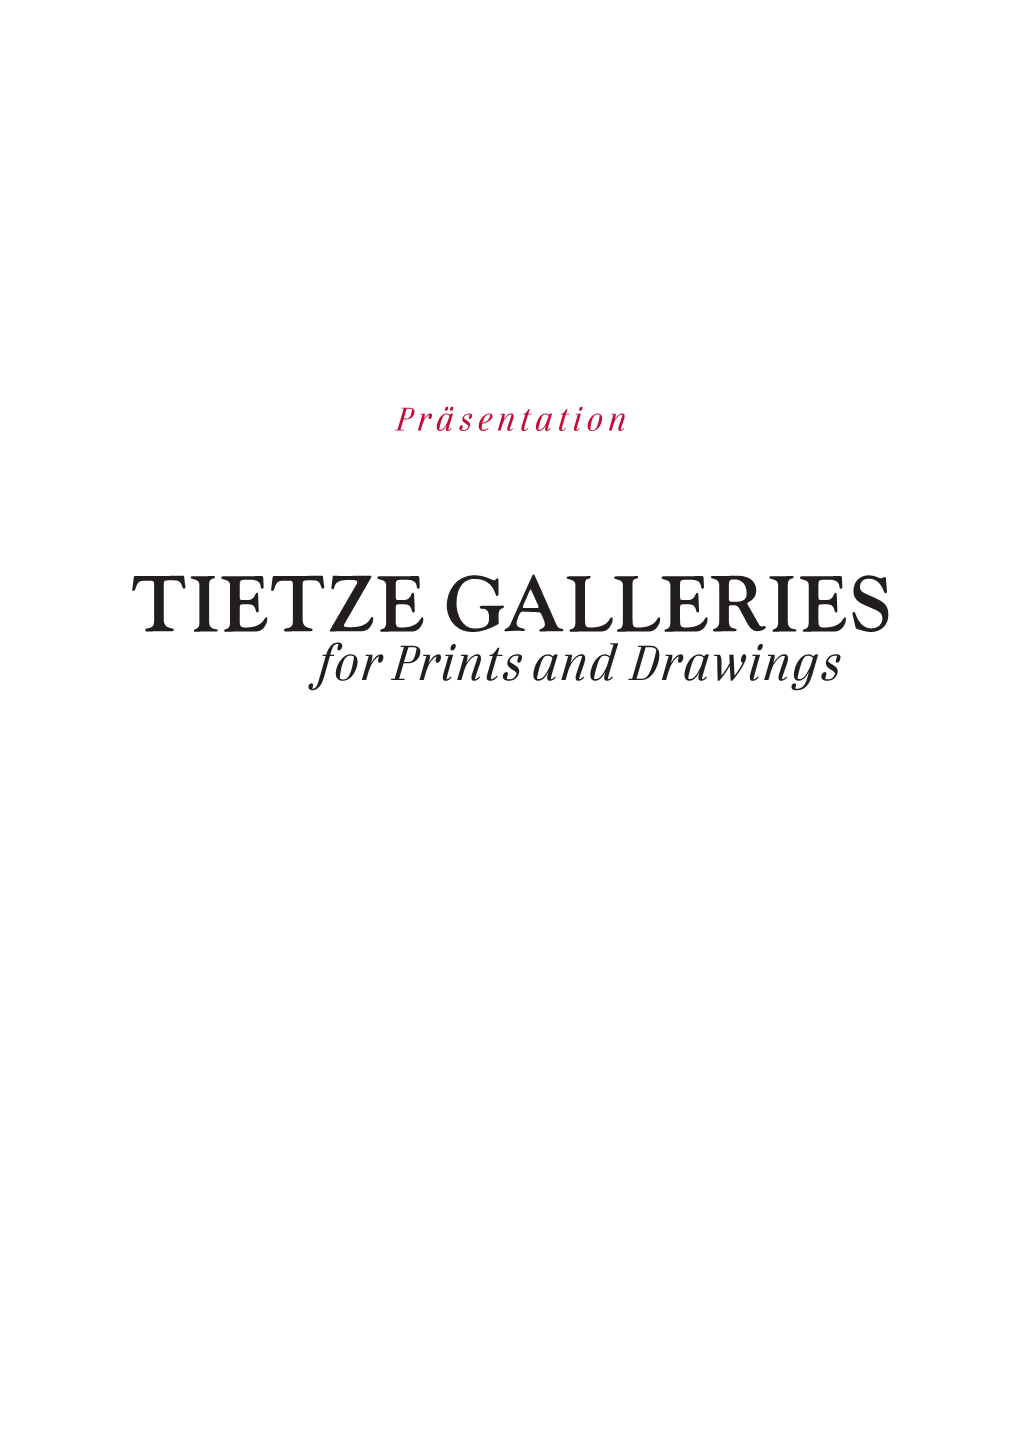 Tietze GALLERIES for Prints and Drawings